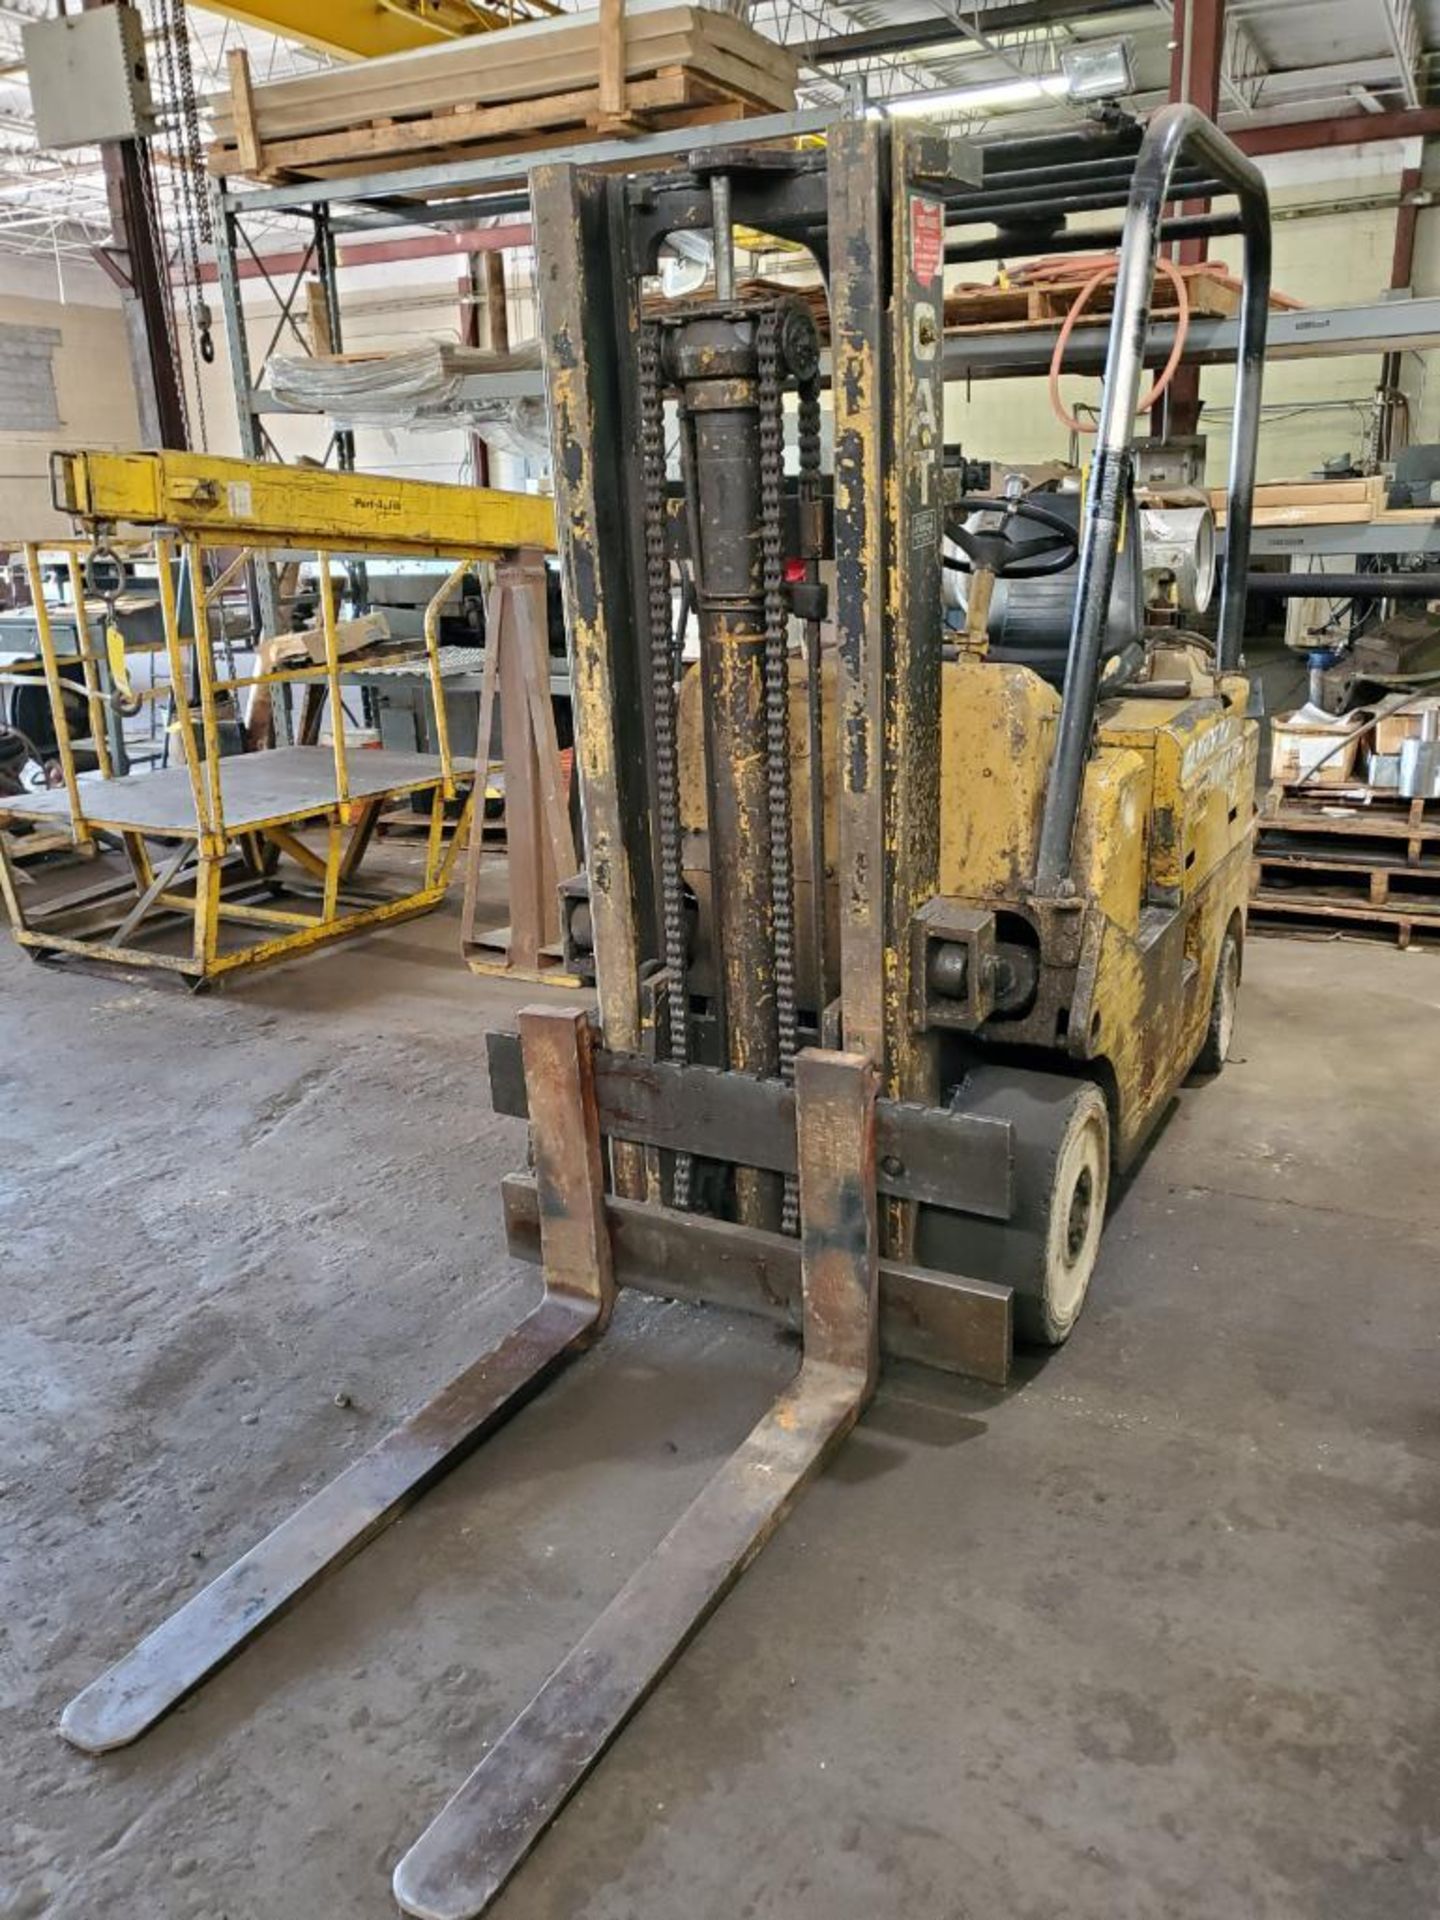 CATERPILLAR 8,000 LB. FORKLIFT, MODEL T80C, S/N 41L425, 121" LIFT HEIGHT, LP, 81-1/2" 2-STAGE - Image 5 of 10